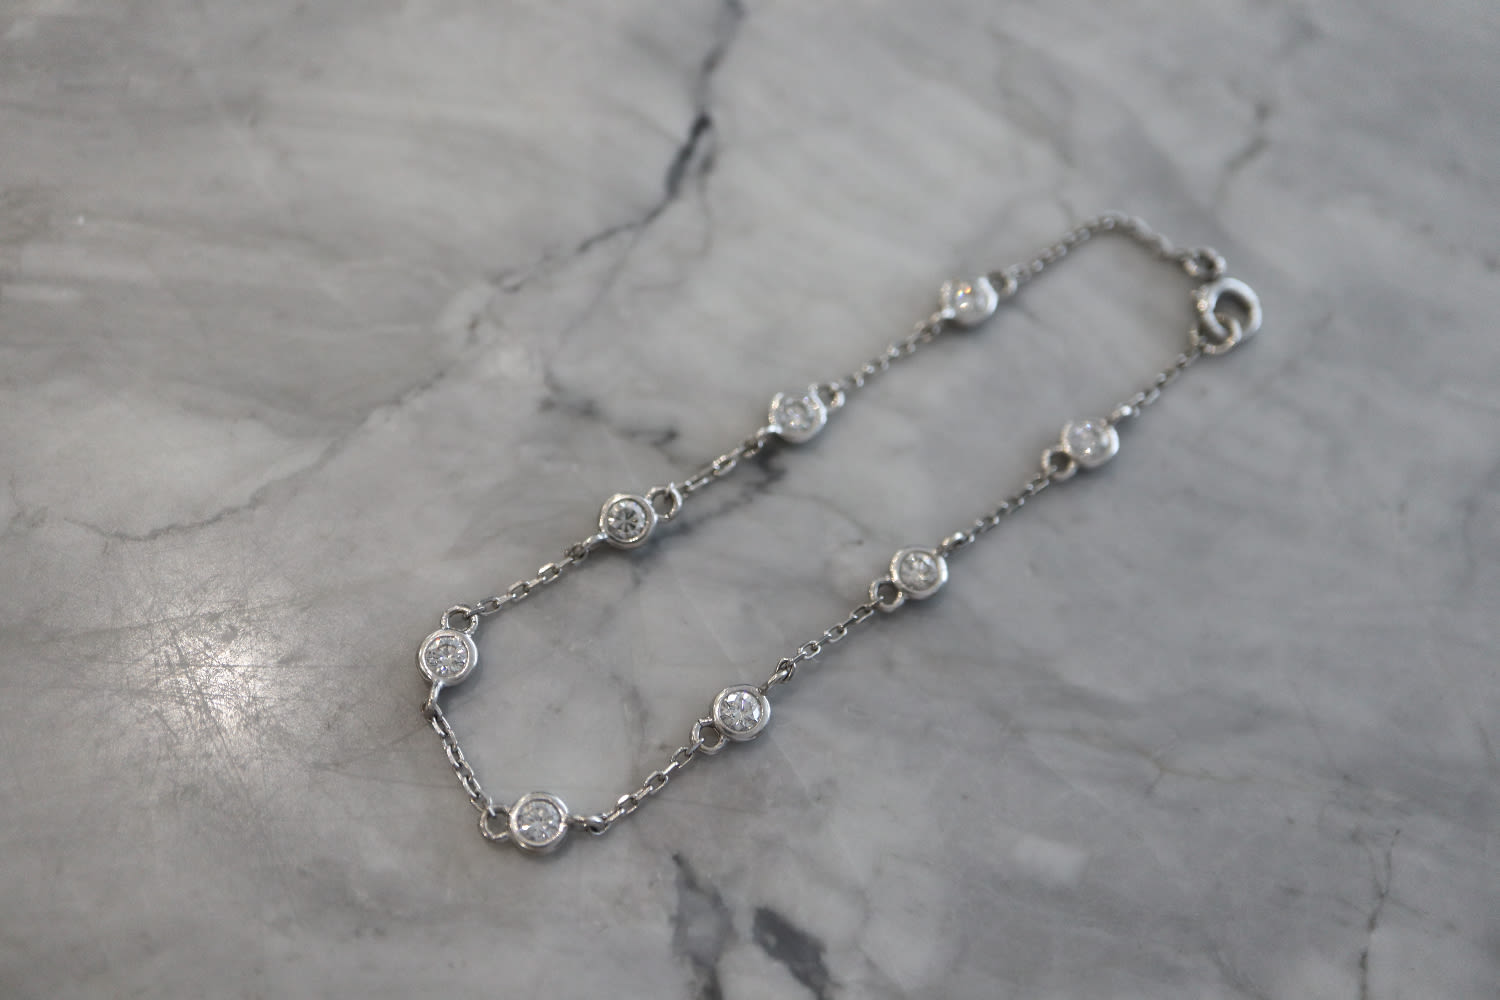 1.20CT DIAMOND BRACELET - 'DIAMOND BY THE YARD' STYLE in 18K WHITE GOLD - Image 2 of 3